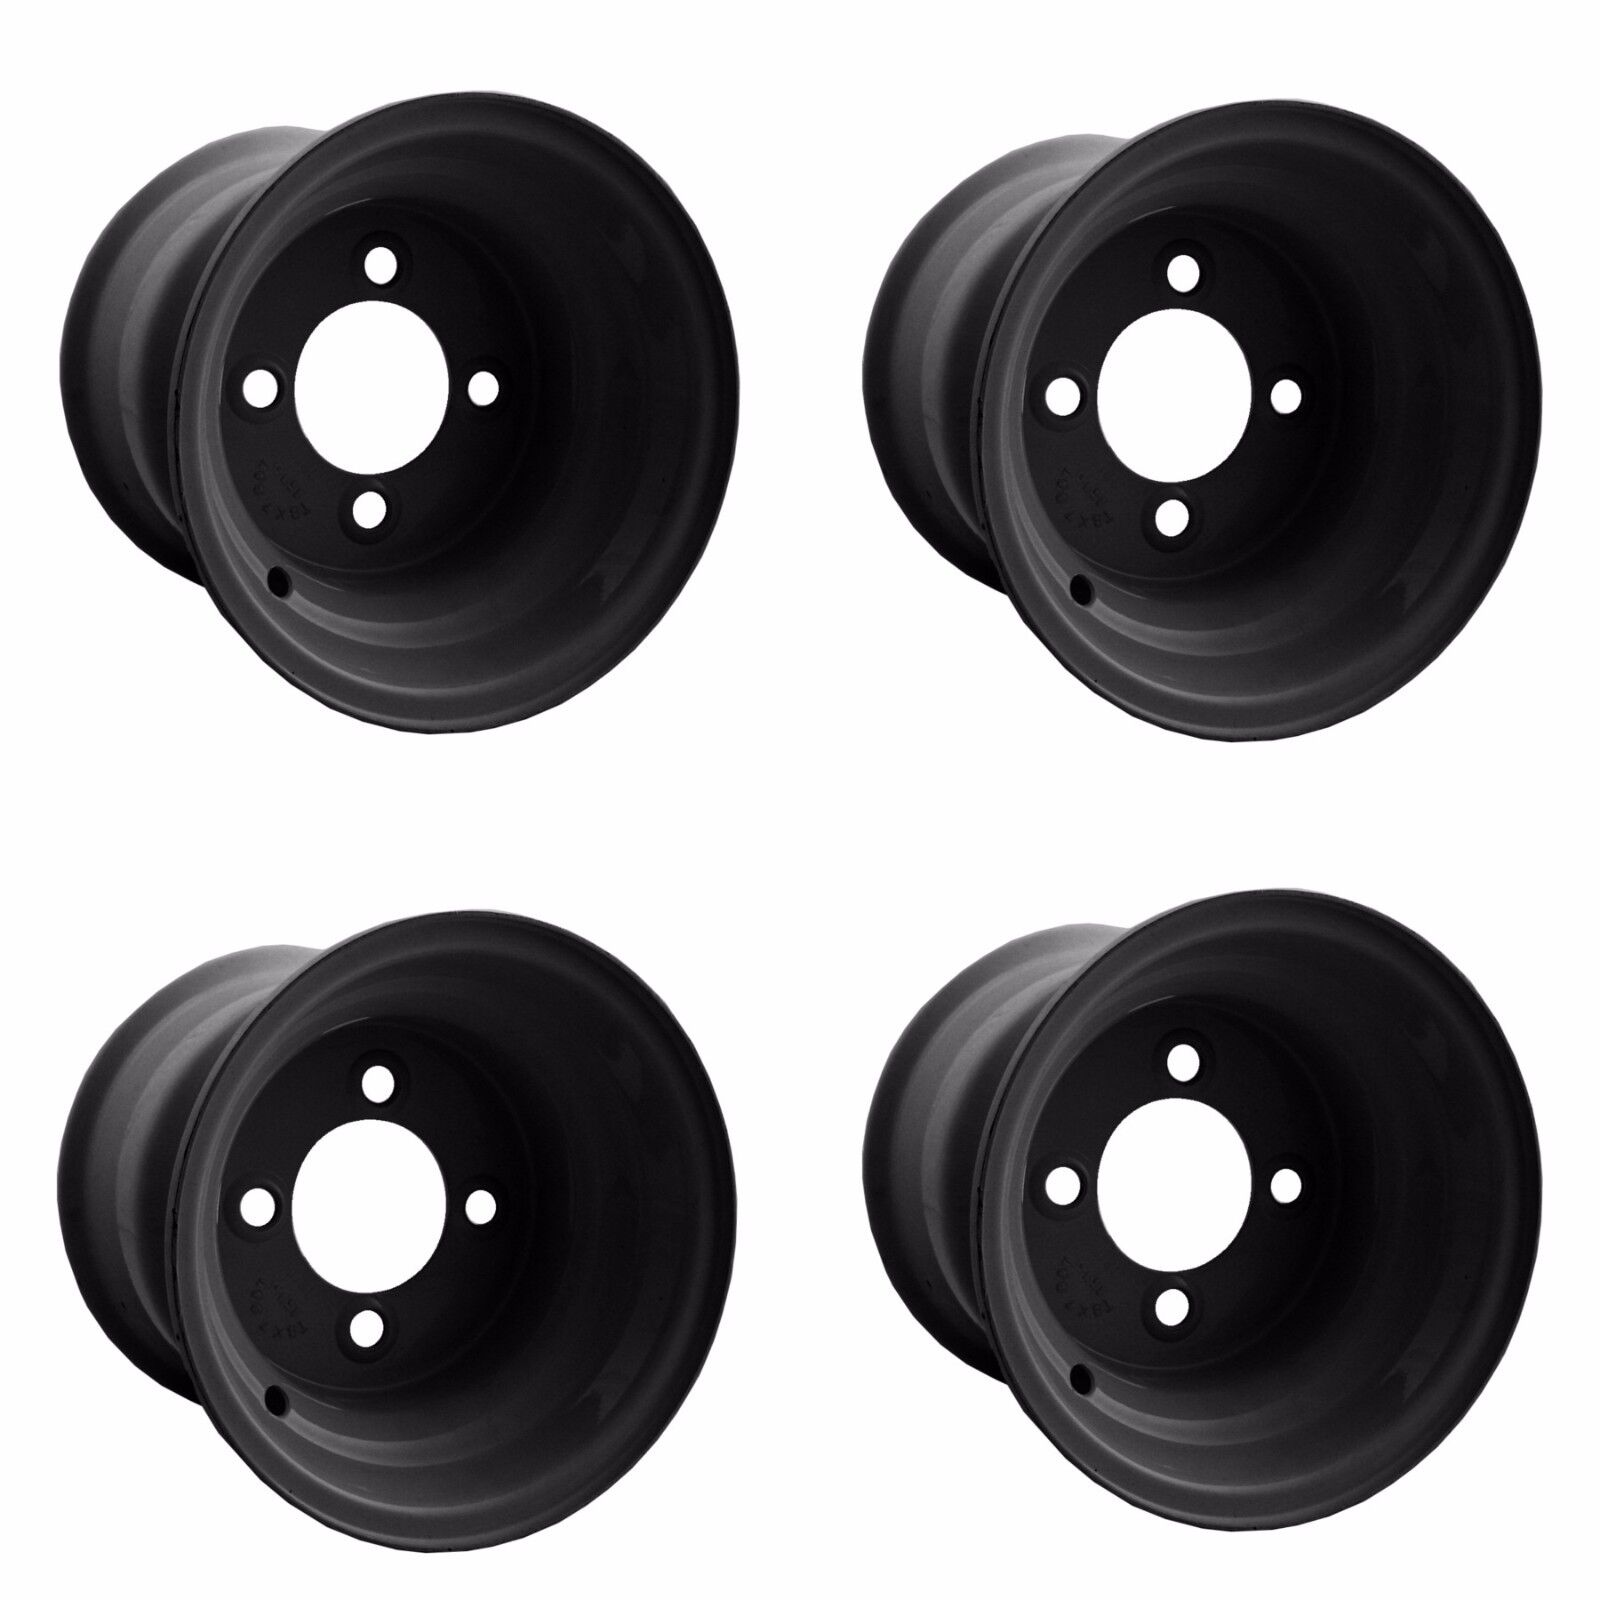 Golf Cart Wheels Set of 4 Black Steel 8x7 With 2+5 Offset Club Car EZGO Yamaha Aftermarket Products 10327